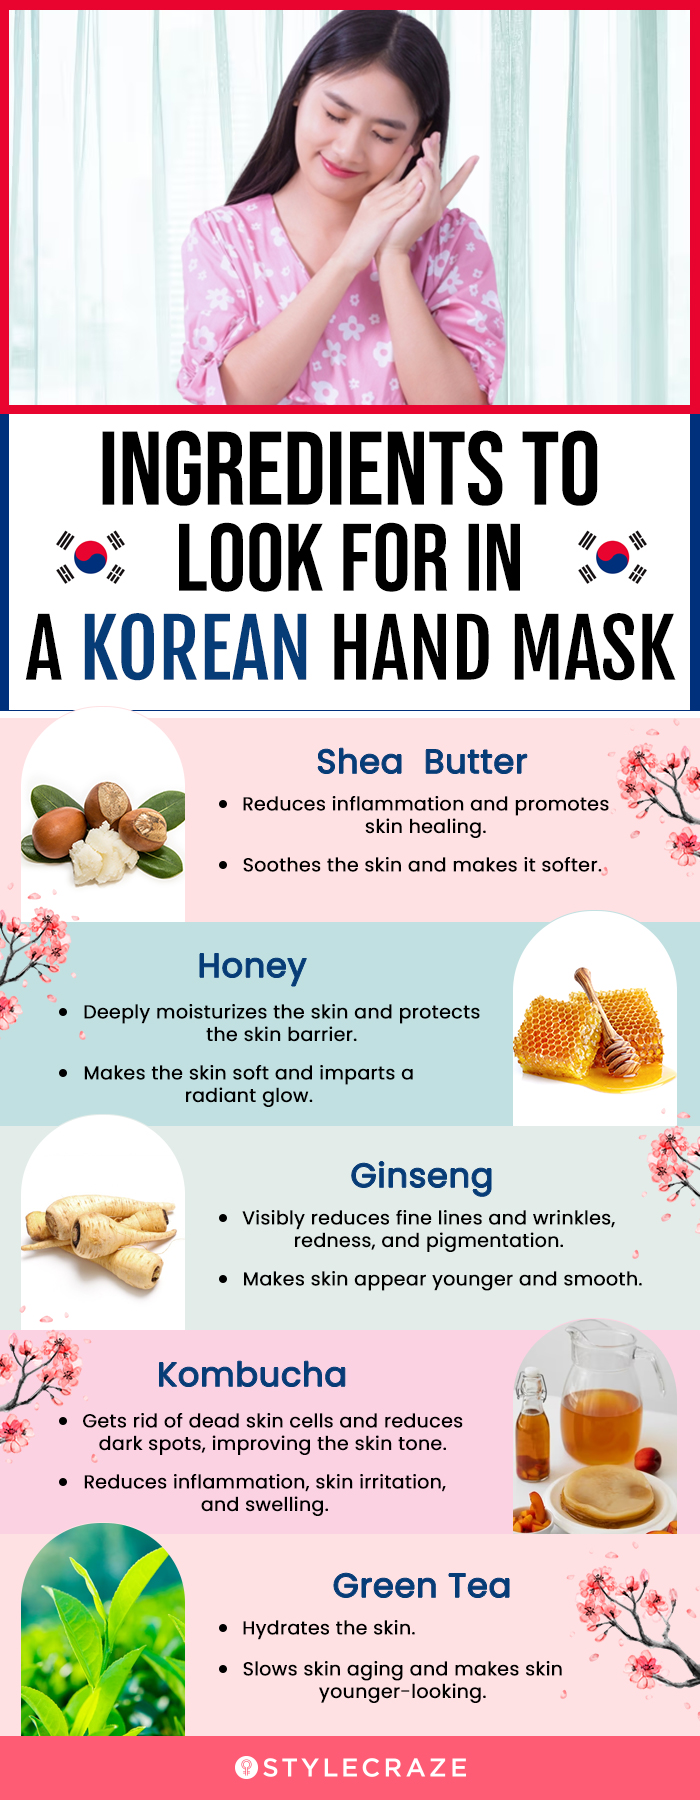  Ingredients To Look For In A Korean Hand Mask (infographic)